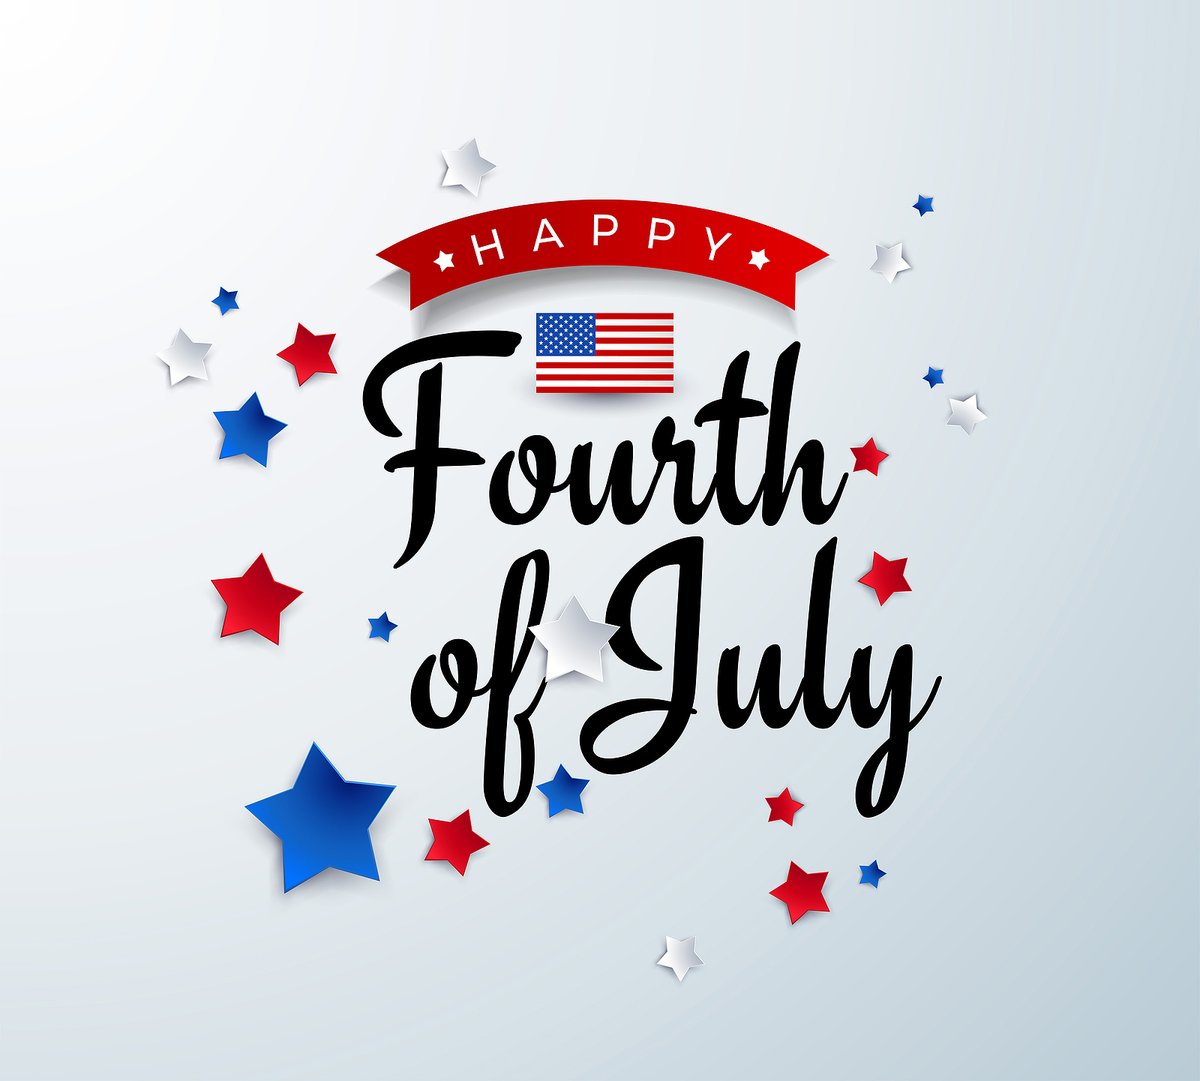 Happy 4th of July from all of us at Inkslinger! Have a safe and happy holiday!